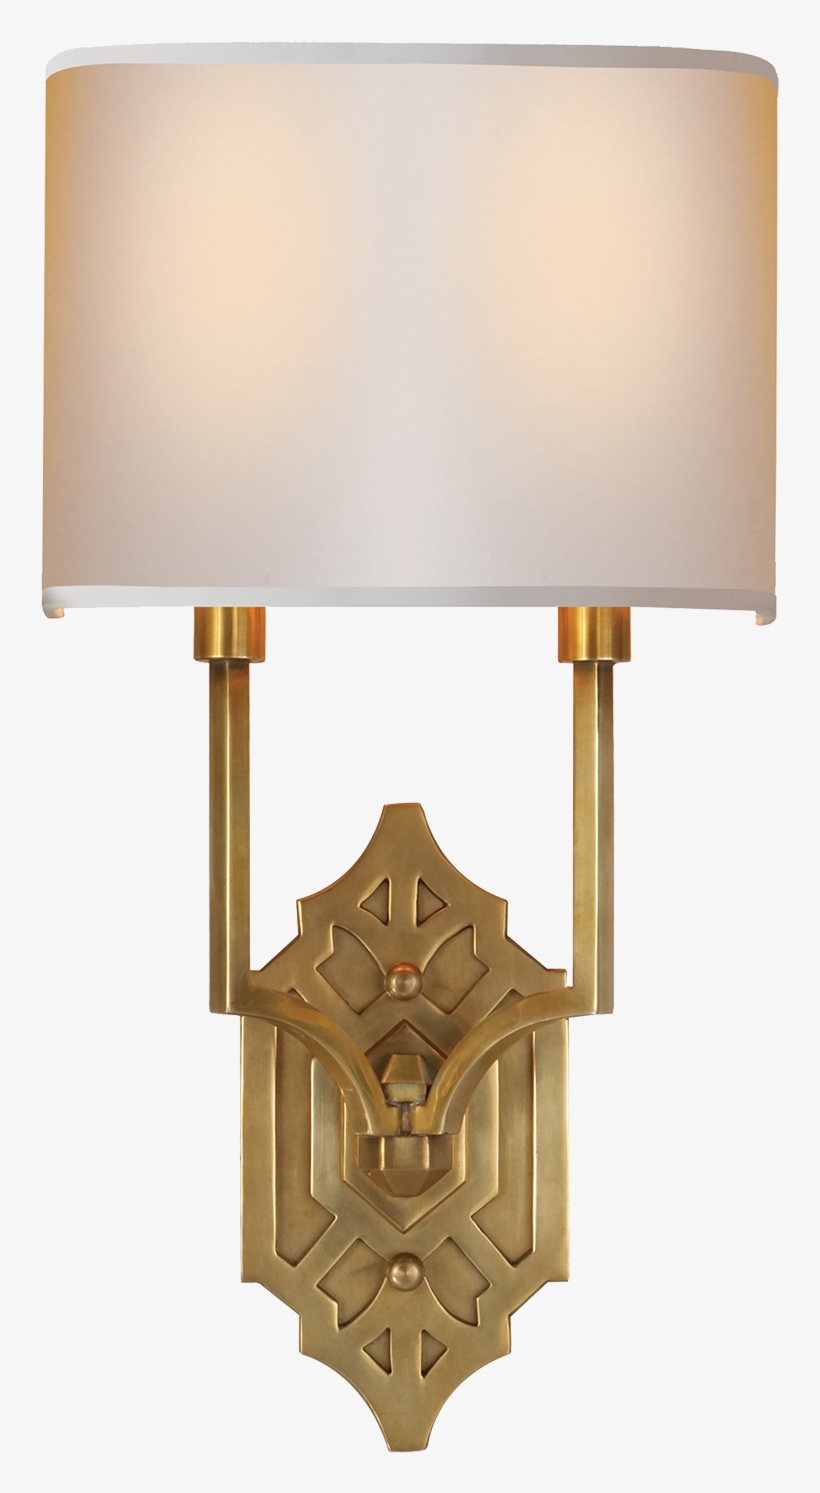 Silhouette Fretwork Sconce In Hand-rubbed Antique Brass - Sconce, transparent png #7970098